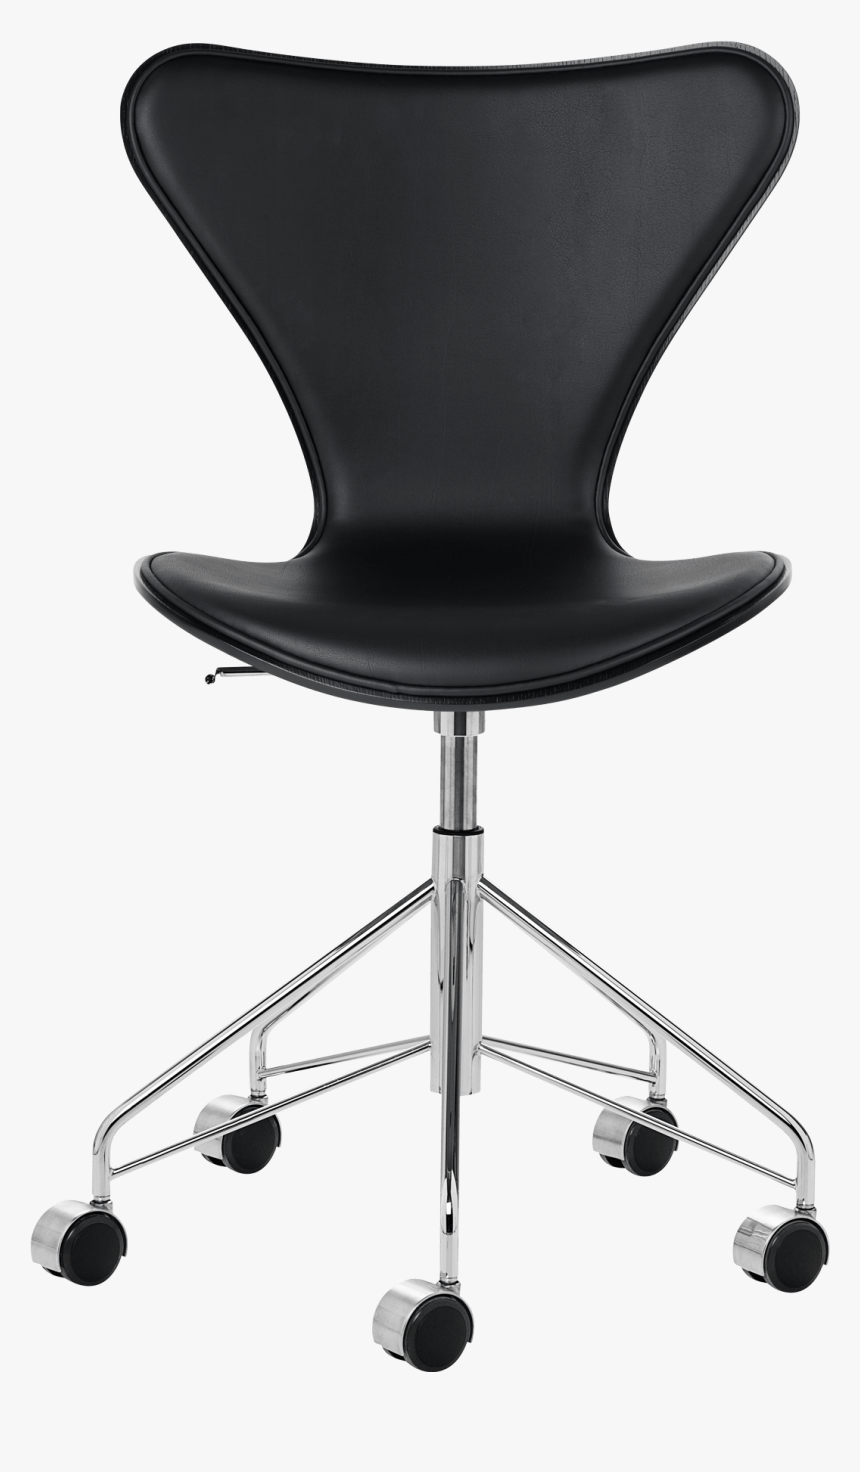 3117 Swivel Chair Front Upholstered Black Leather - Fritz Hansen 3117, HD Png Download, Free Download